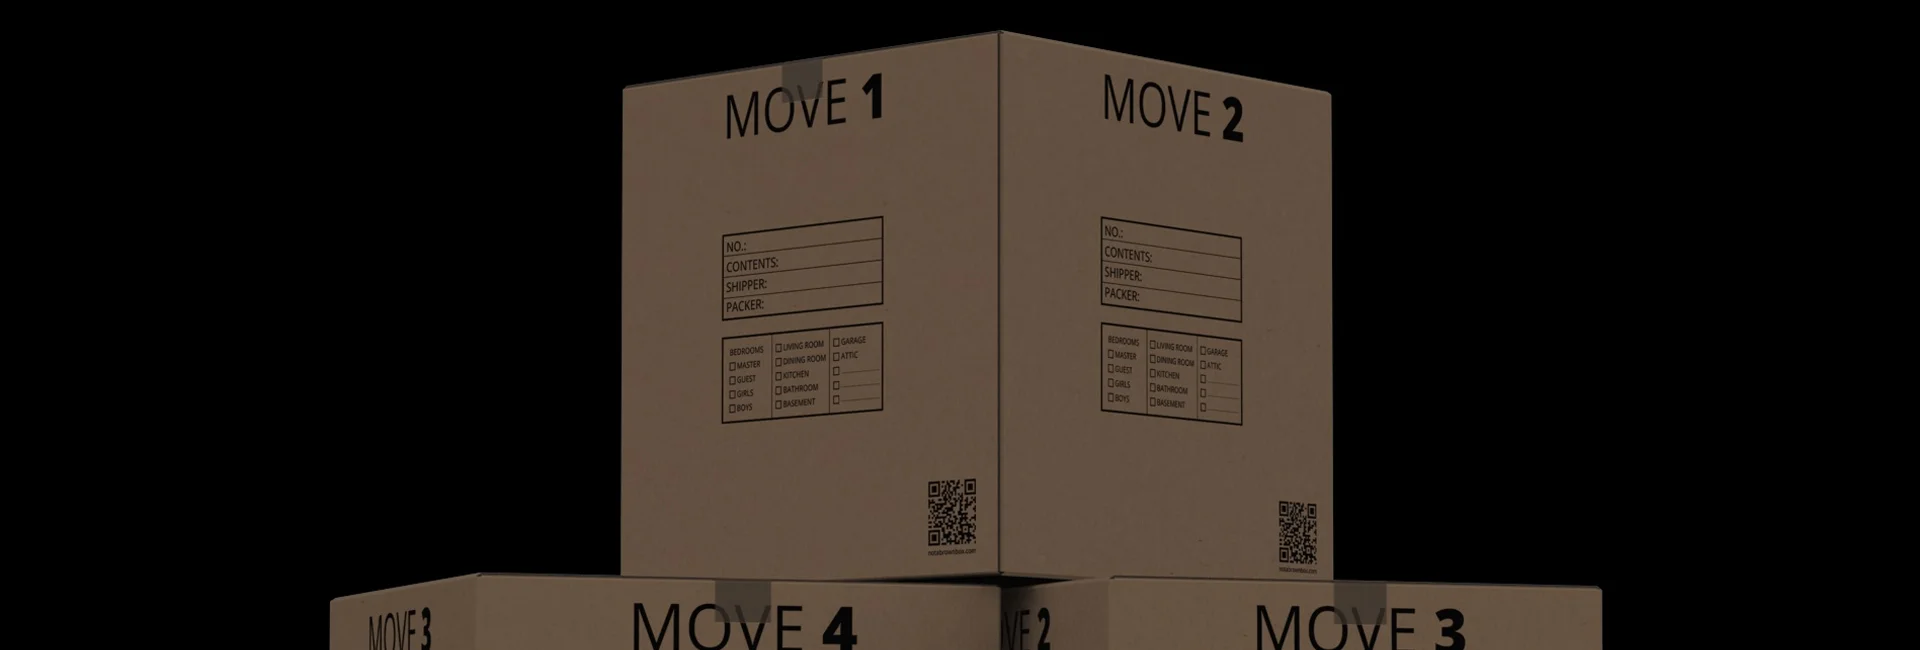 Notabrownbox inspires greener moving - ISS Relocations